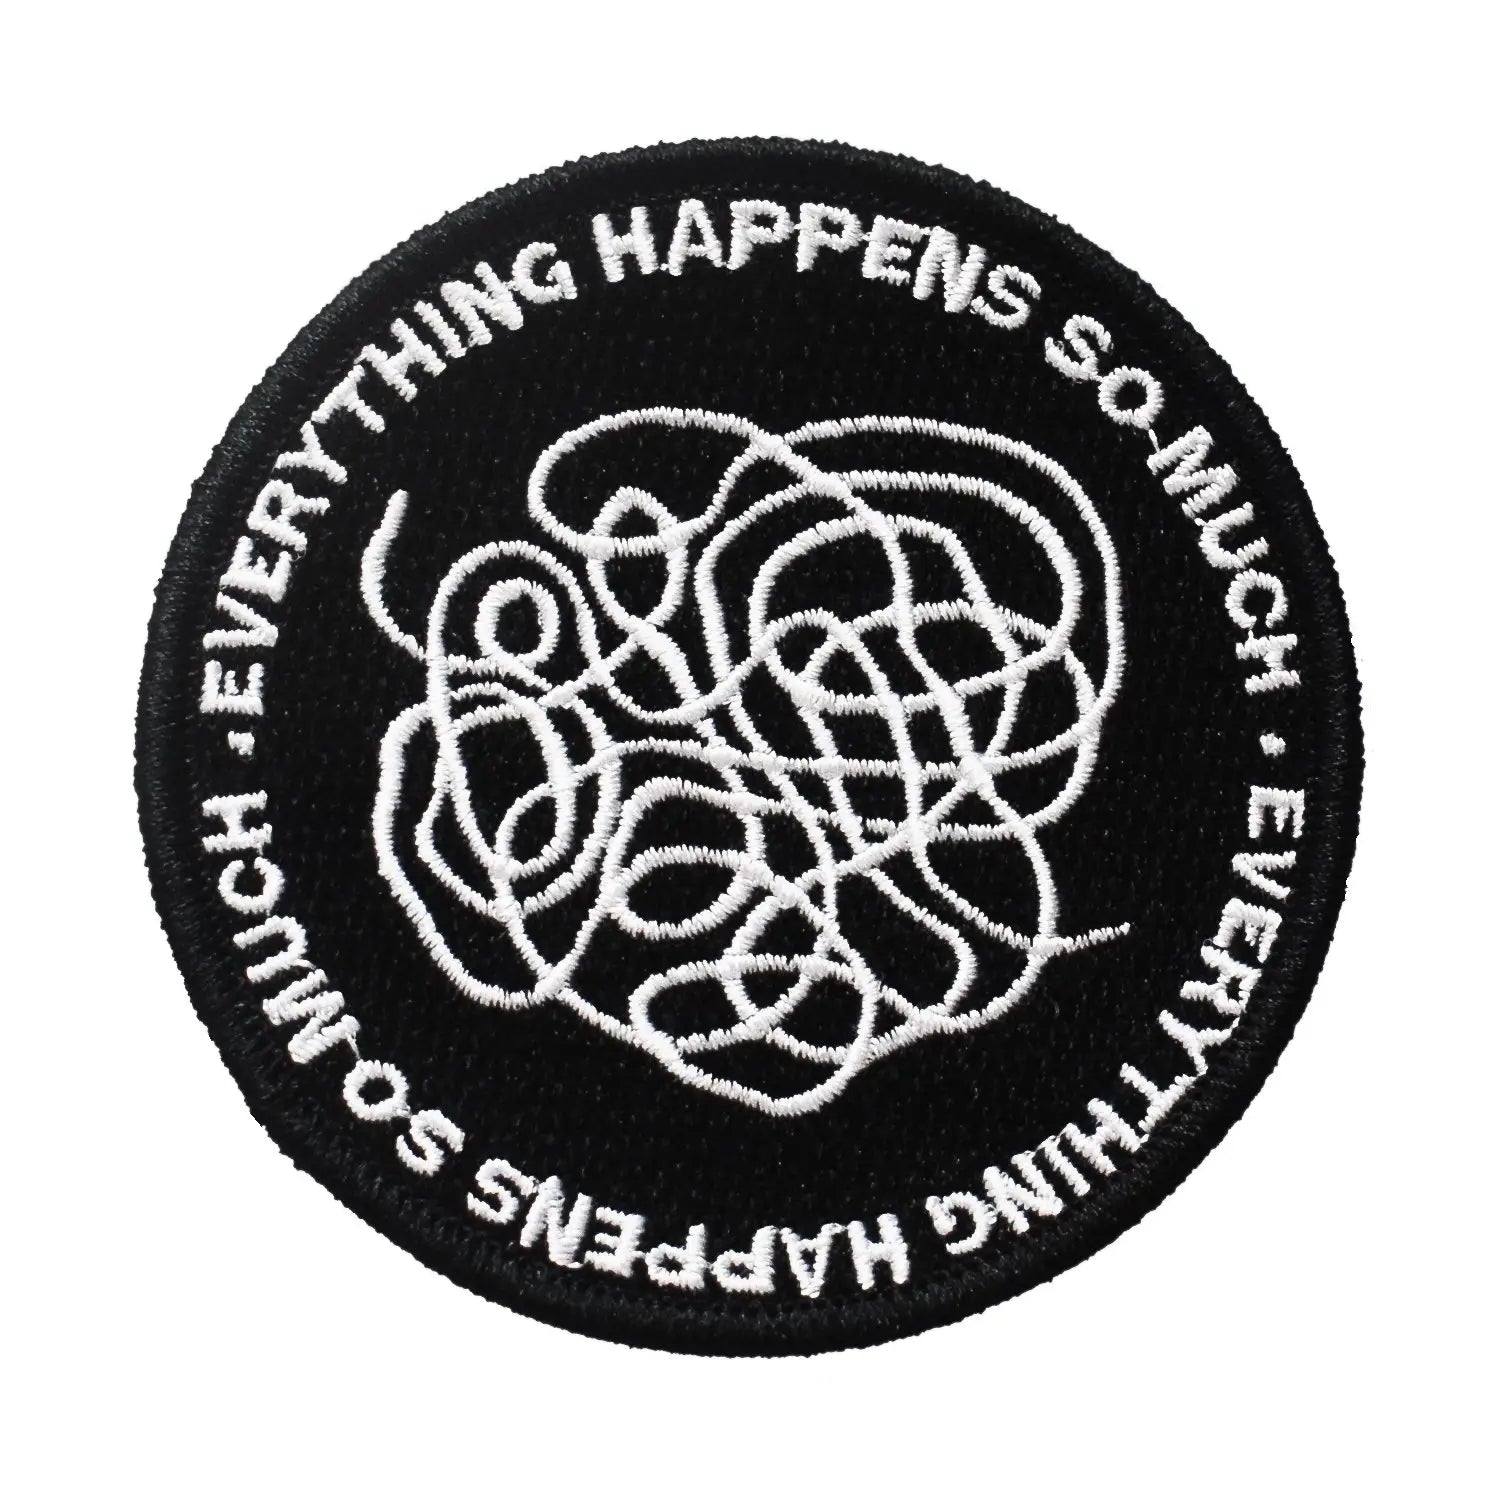 A round embroidered patch with a black background and the words “Everything happens so much” repeating around the border of the patch. There is an abstract swirled shape in white in the middle